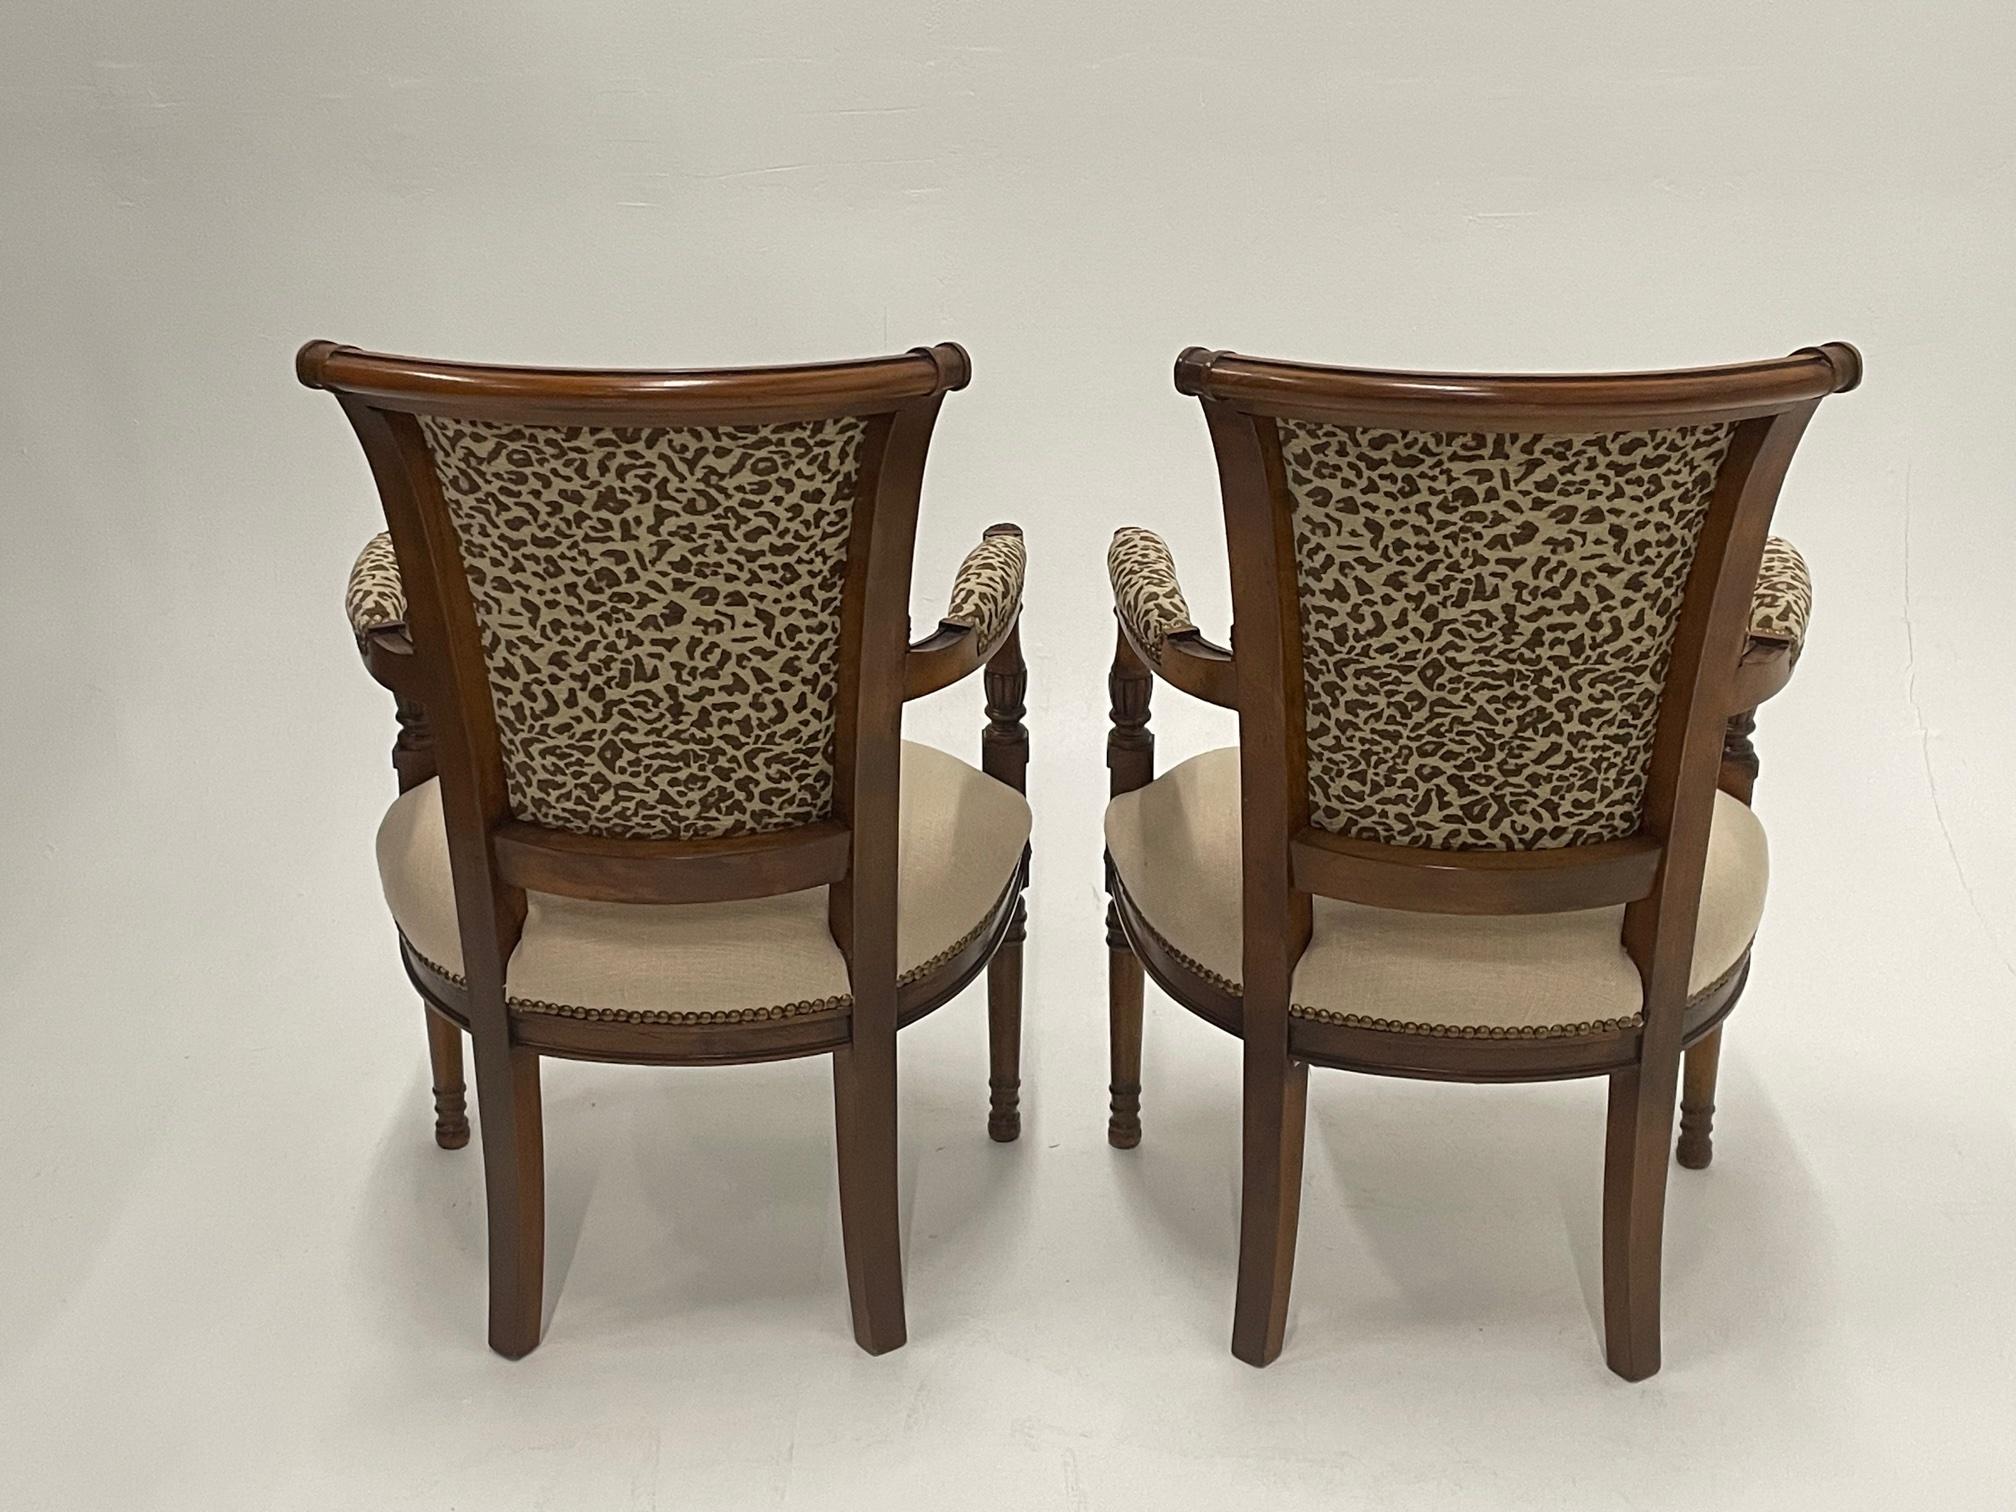 Superbly Stylish Pair of Carved Walnut Armchairs Upholstered in Linen & Leopard For Sale 1